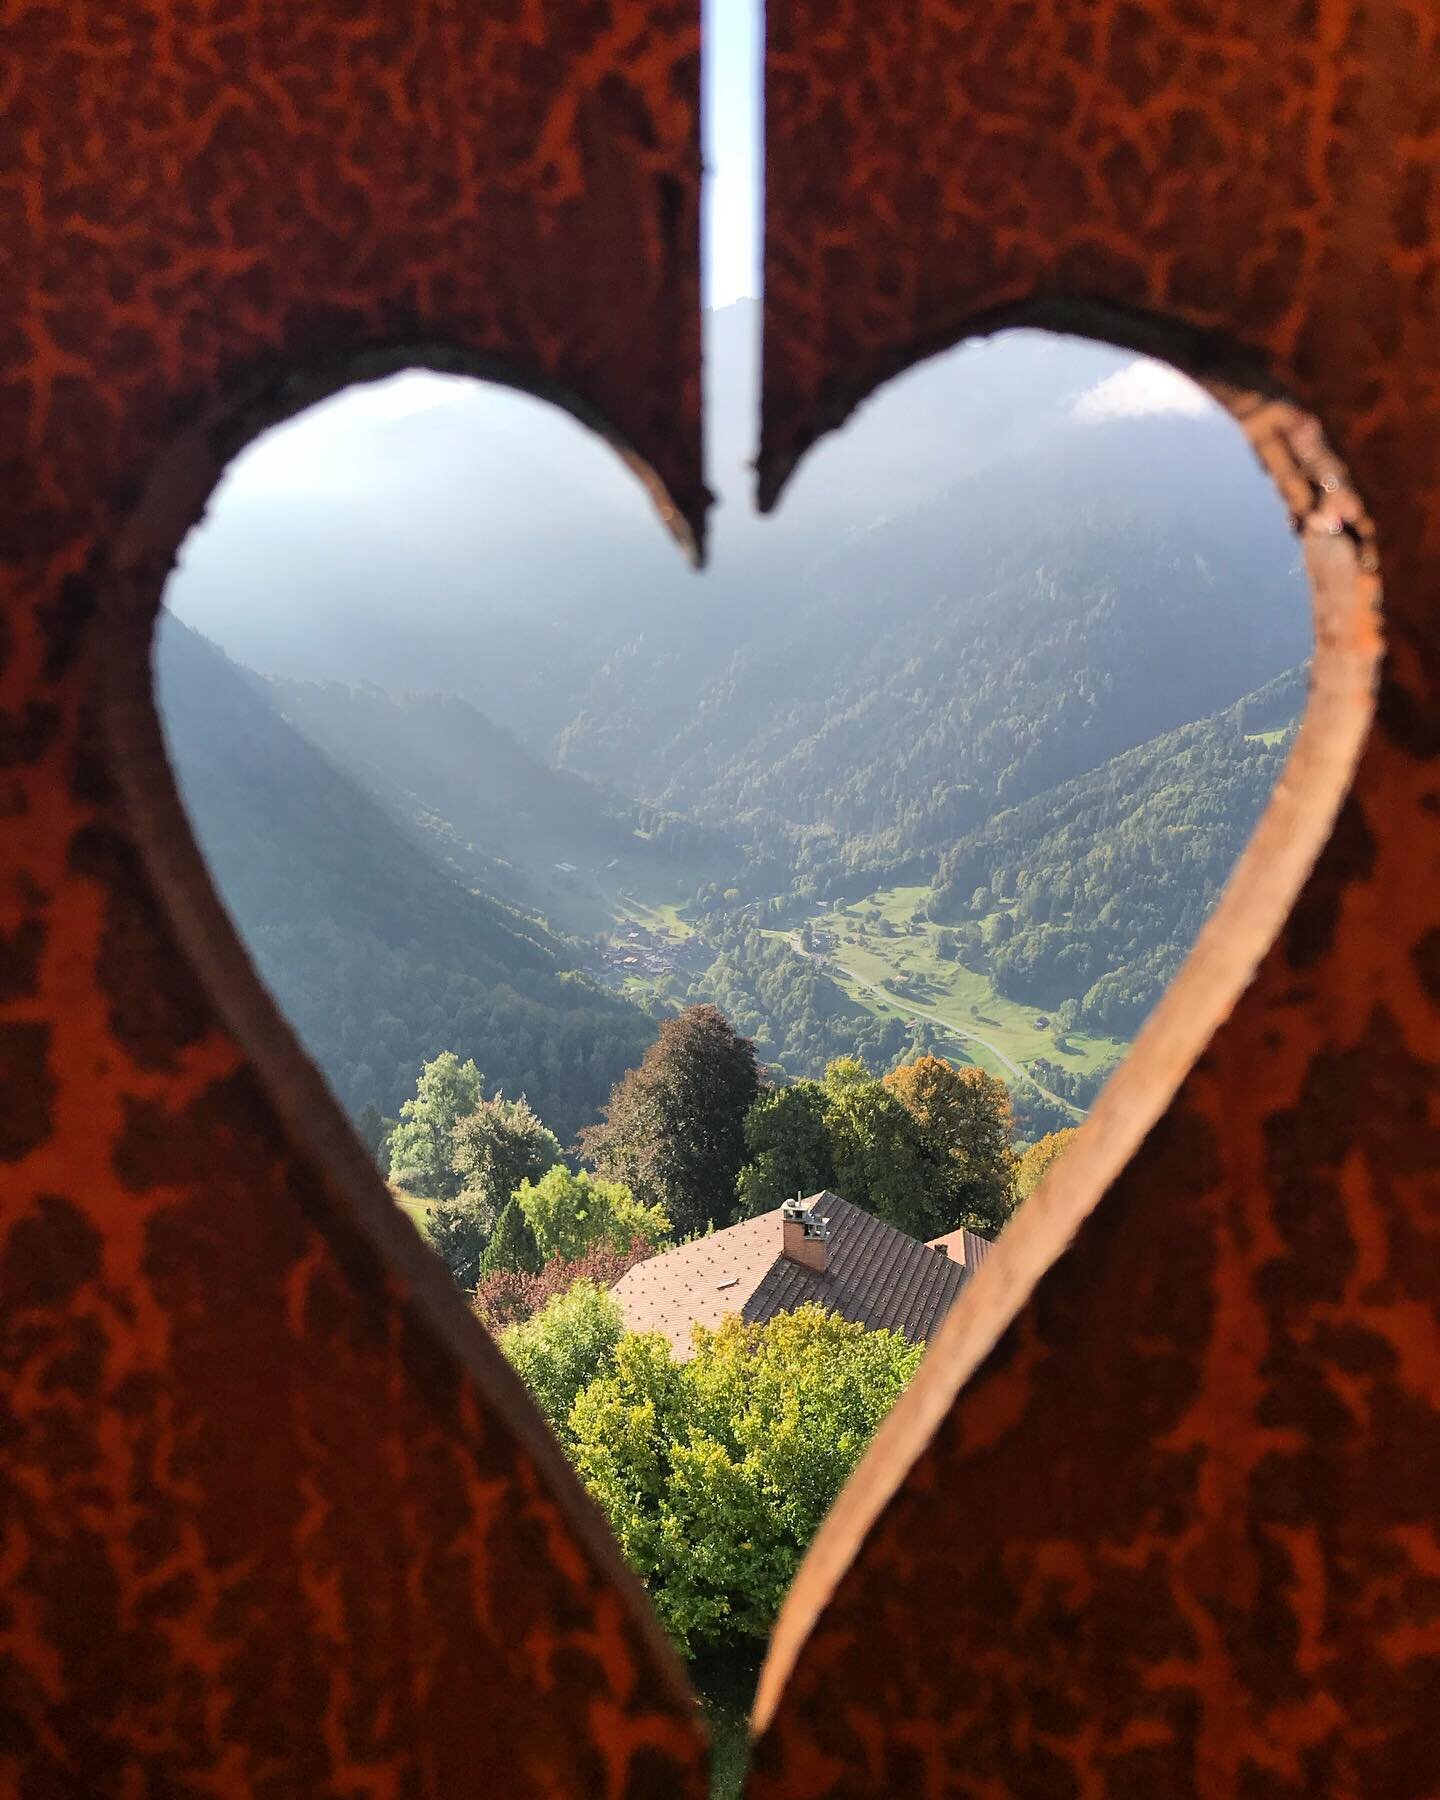 Happy Valentine&rsquo;s Day! 😍🇨🇭❤️ My lovely balcony view from one of two affordably priced rooms above the Buffet de la Gare de Gryon back in September 2018 #inlovewithswitzerland 

#gryon #switzerland #wanderlust #wanderlove #budgetswitzerland #